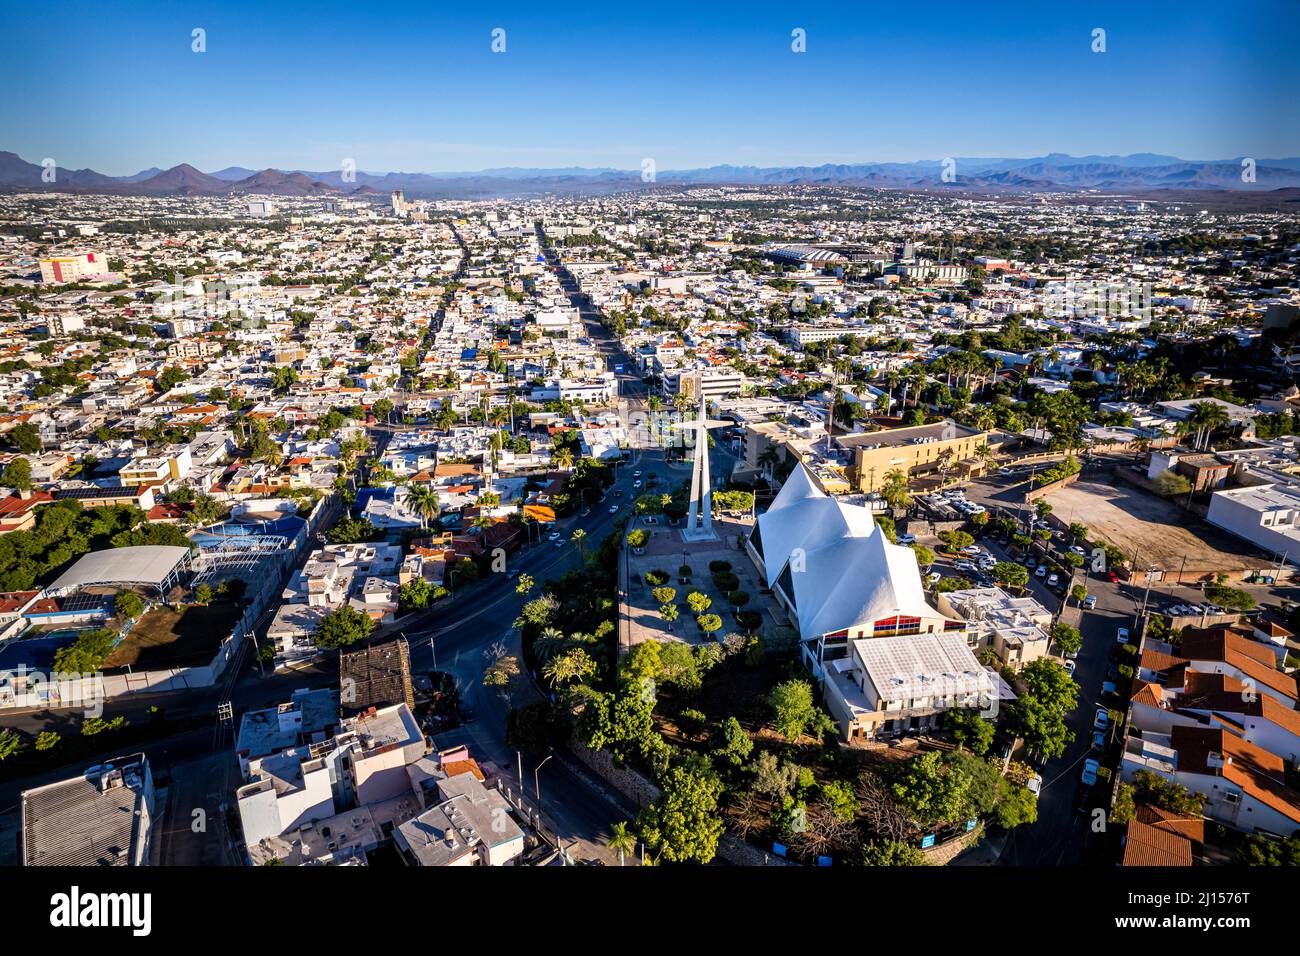 Aerial view of the Basilica in Culiacan, the capital city of Sinaloa, Mexico. Stock Photo